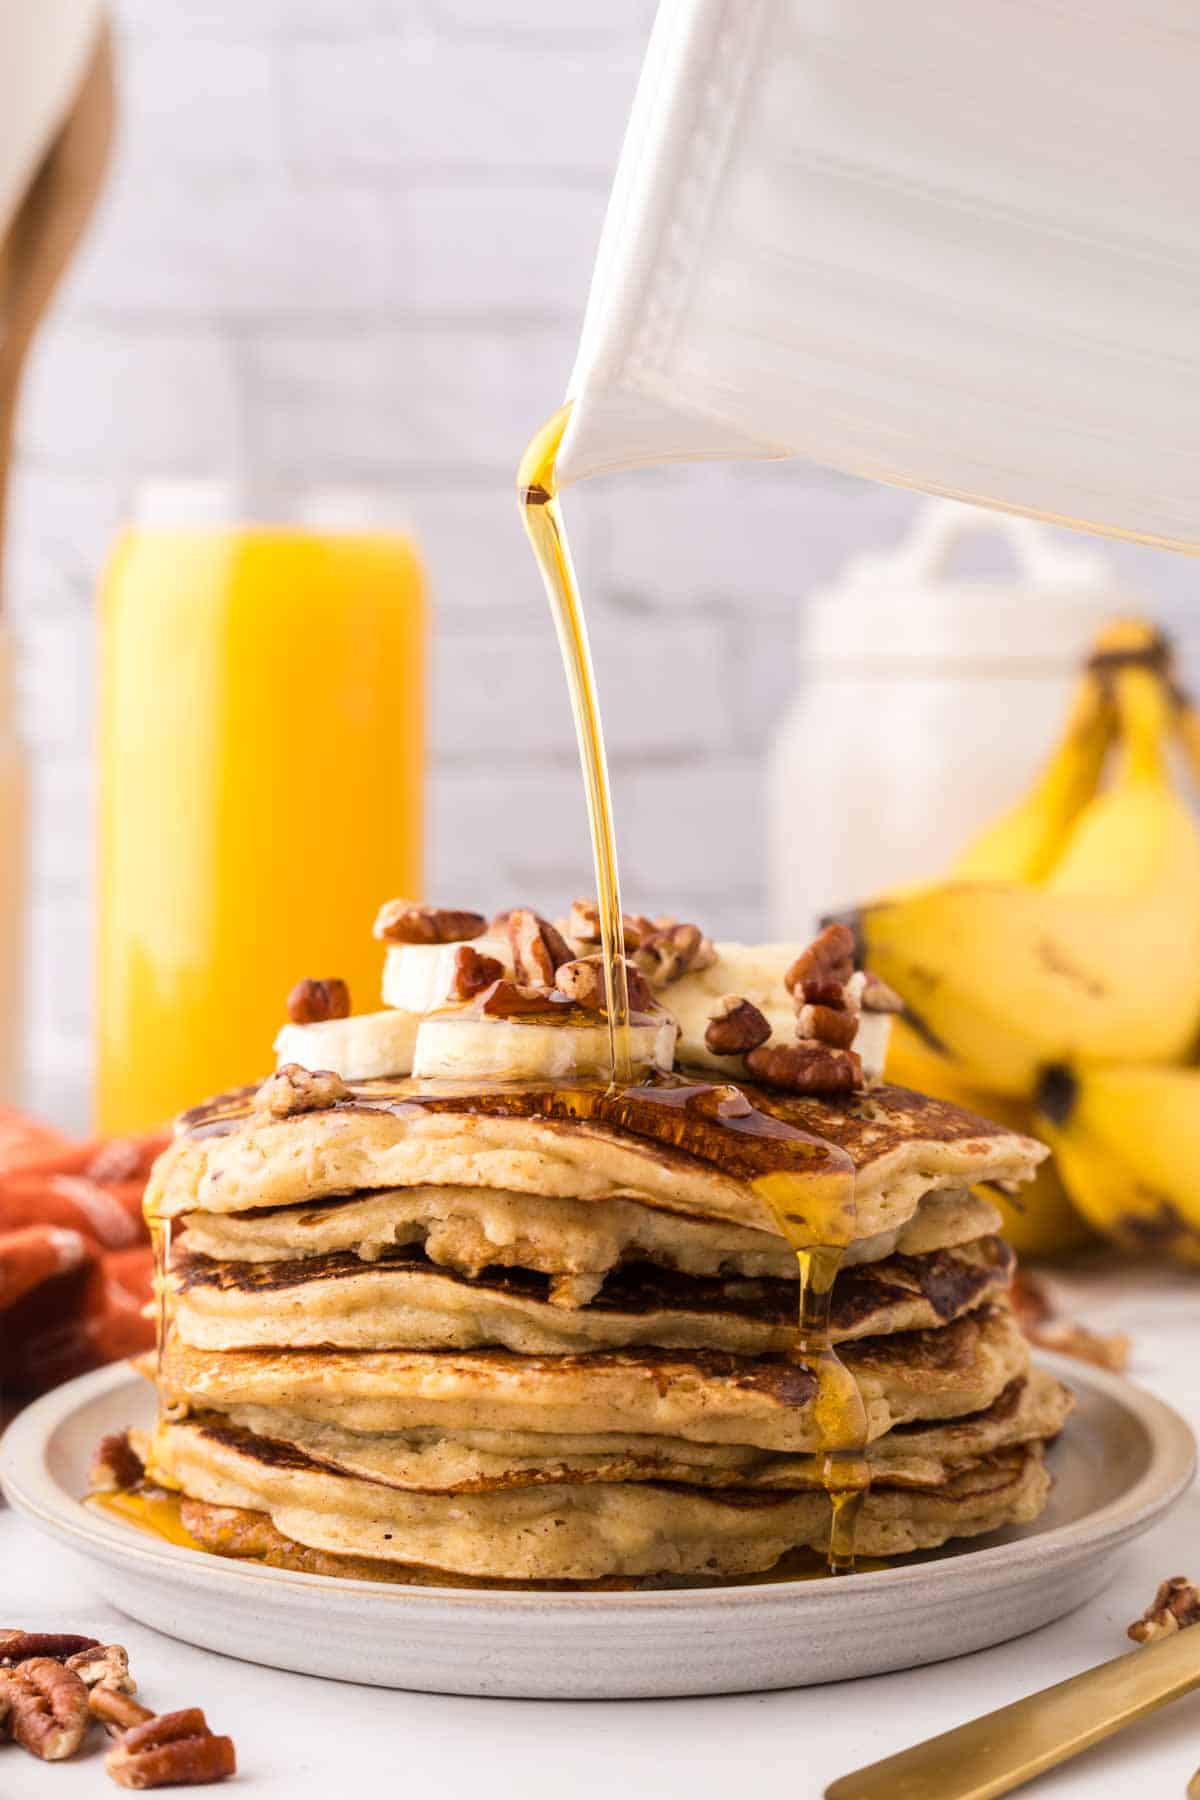 side view of a stack of banana pancakes on a round plate with walnuts and bananas with syrup being poured on top